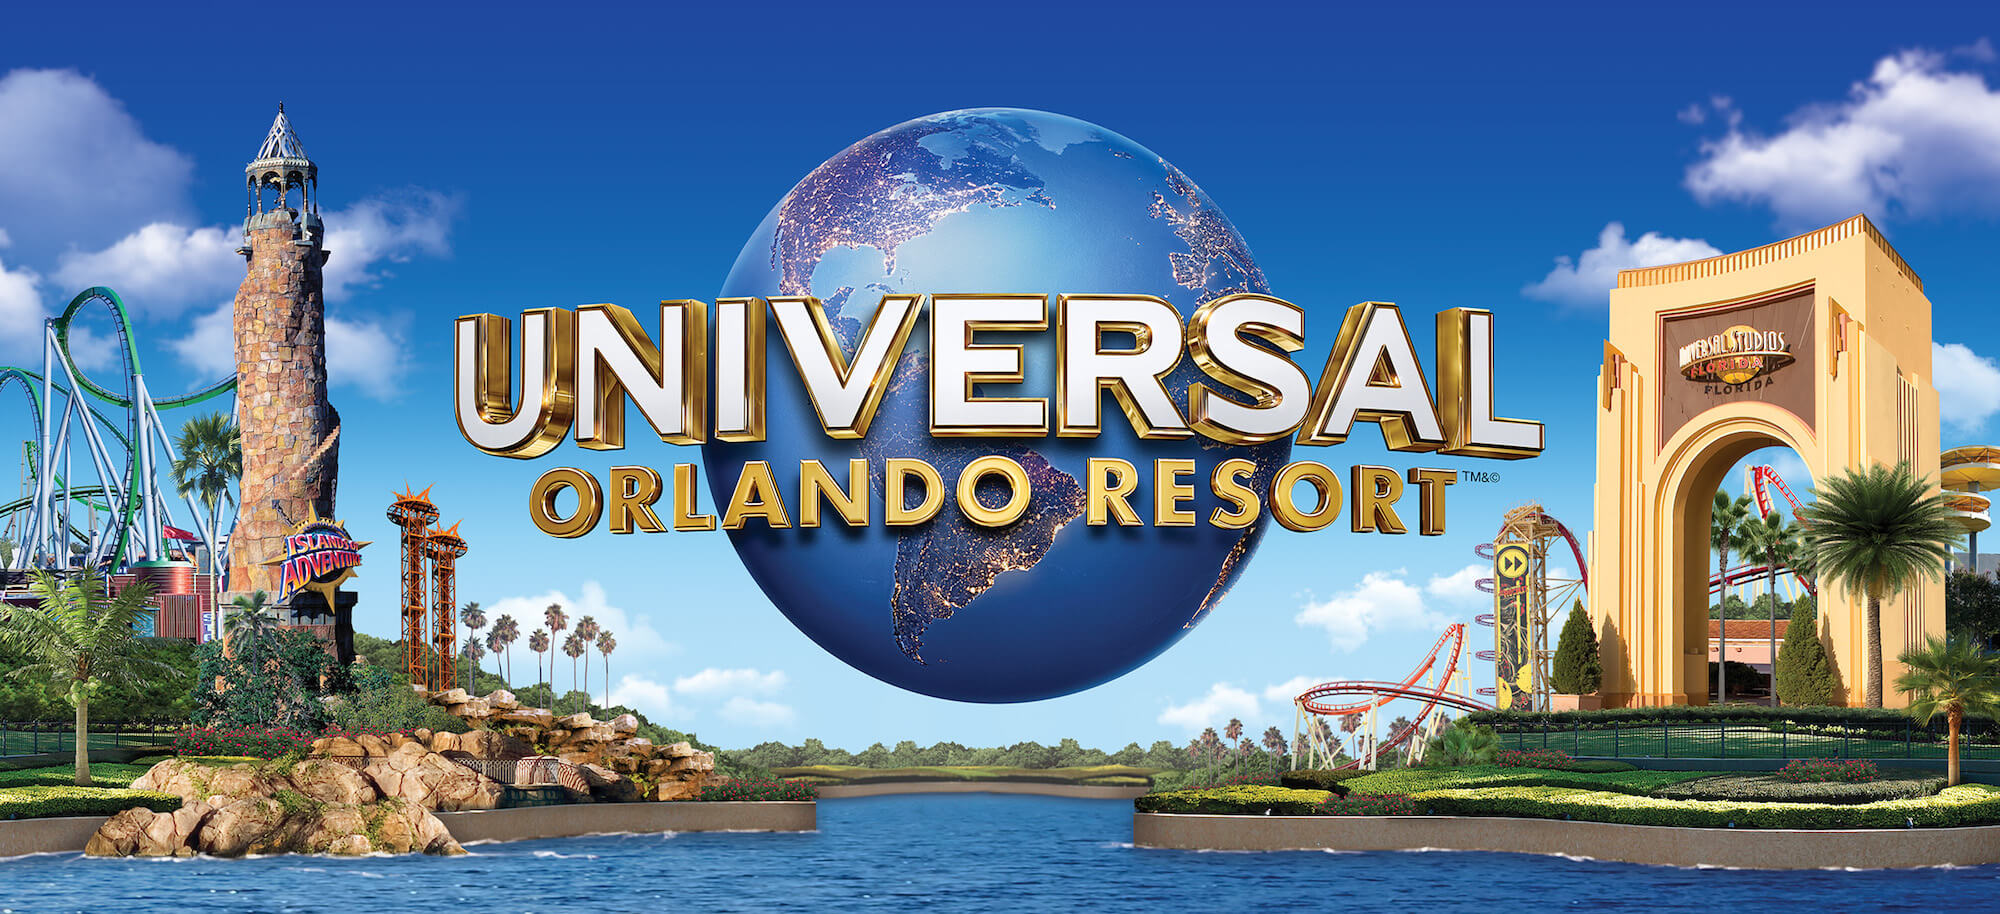 Fourth Universal Studios Park Reportedly in the Works